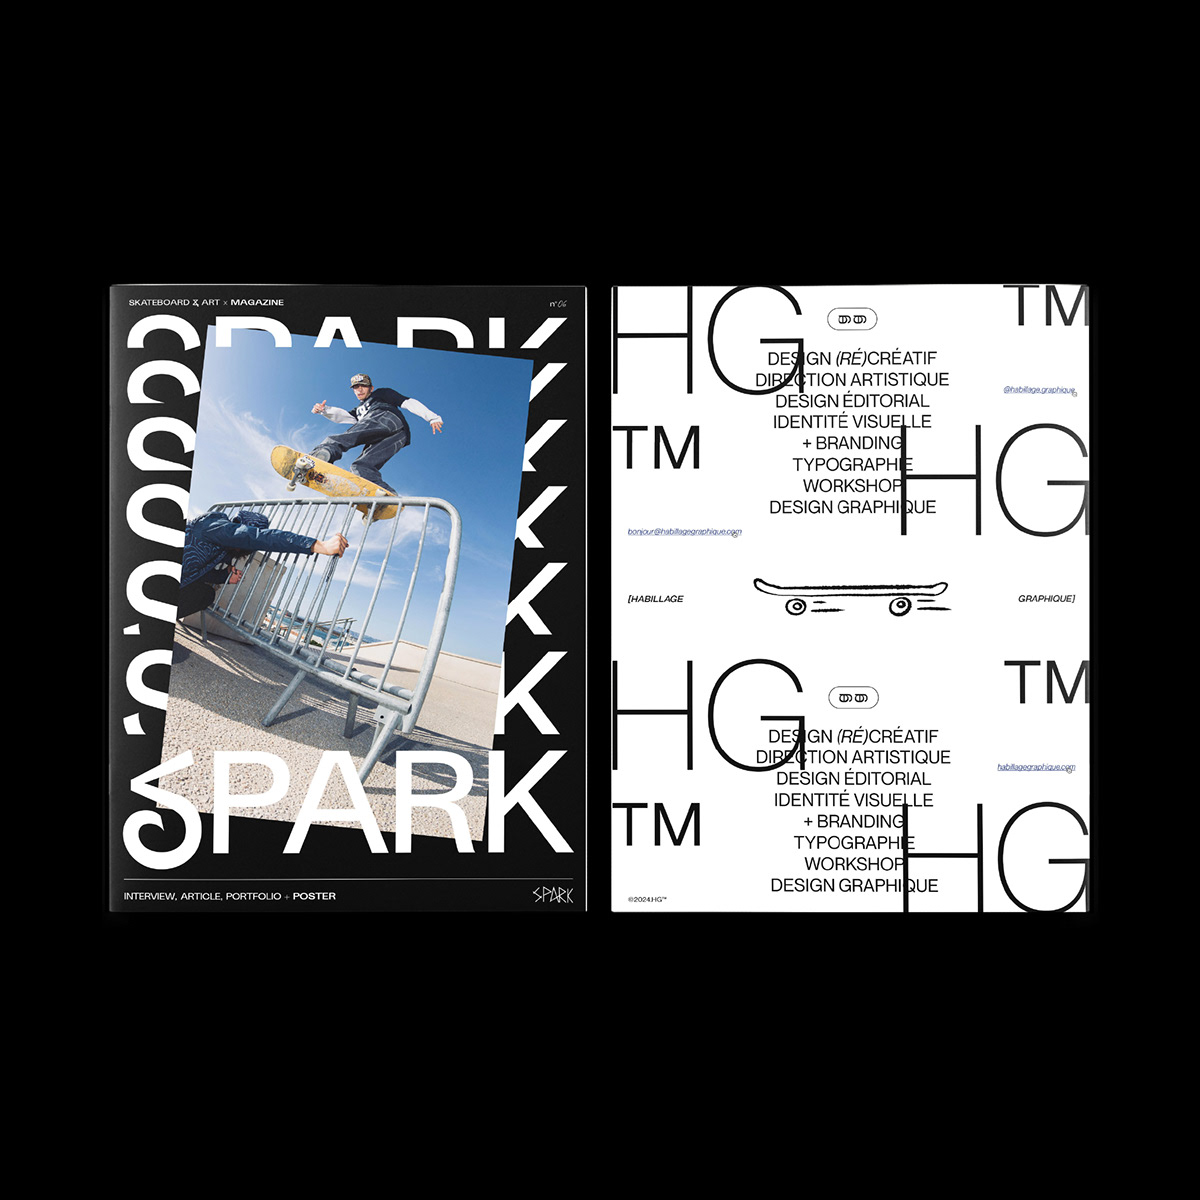 image from the Skate Art Merges in SPARK's Editorial Design and Graphic Design Showcase article on Abduzeedo